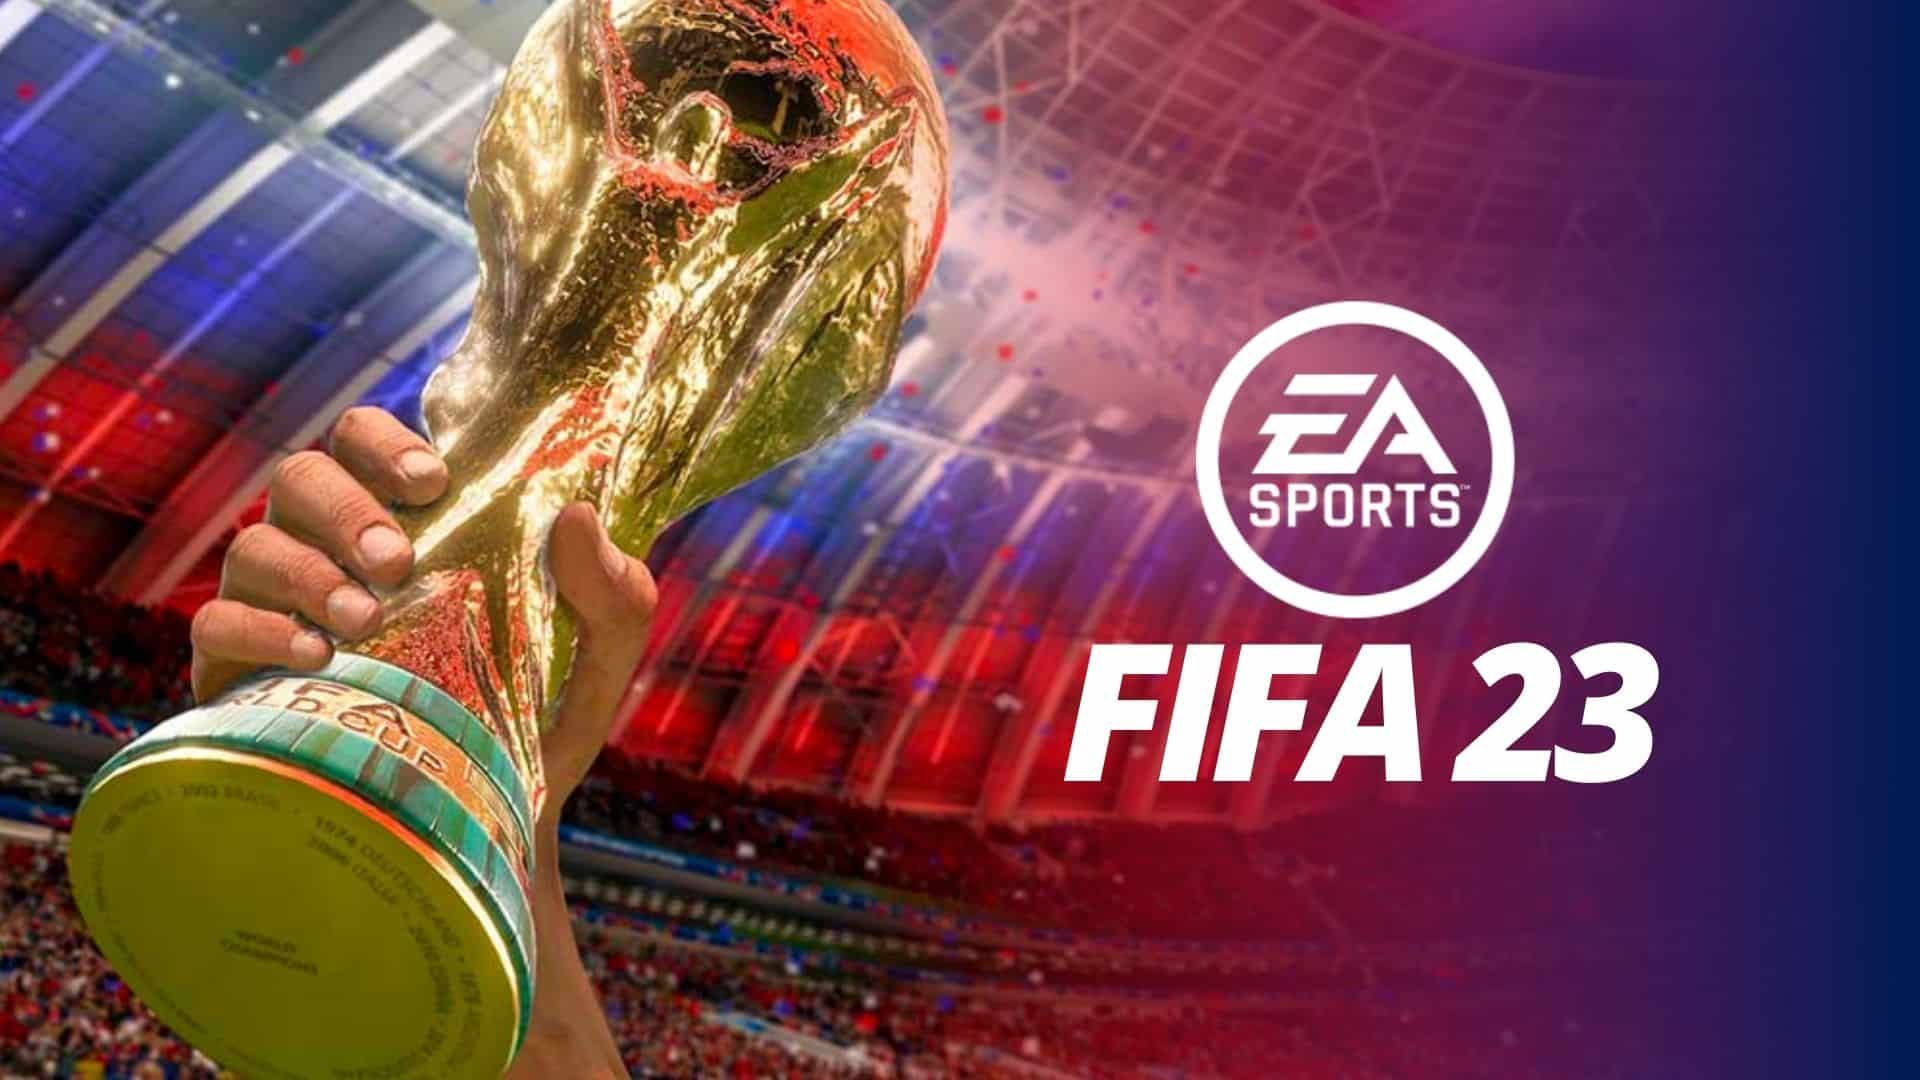 EA Sports shared the first promotional material of FIFA 23 and gave the good news of the first FIFA 23 trailer with its official social media accounts.